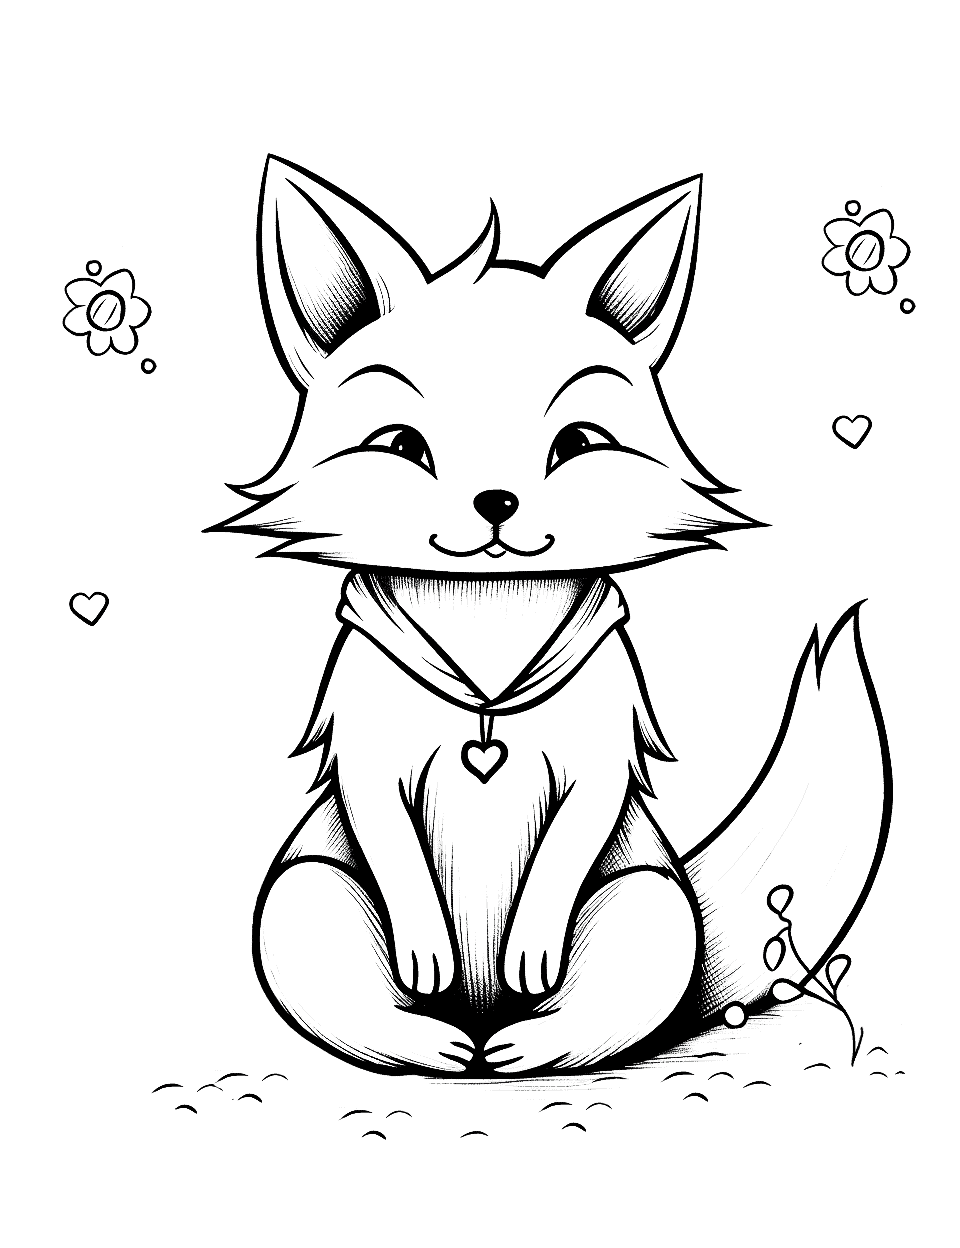 Fox Yoga Morning Coloring Page - A fox in a serene yoga pose, radiating calm and peace.